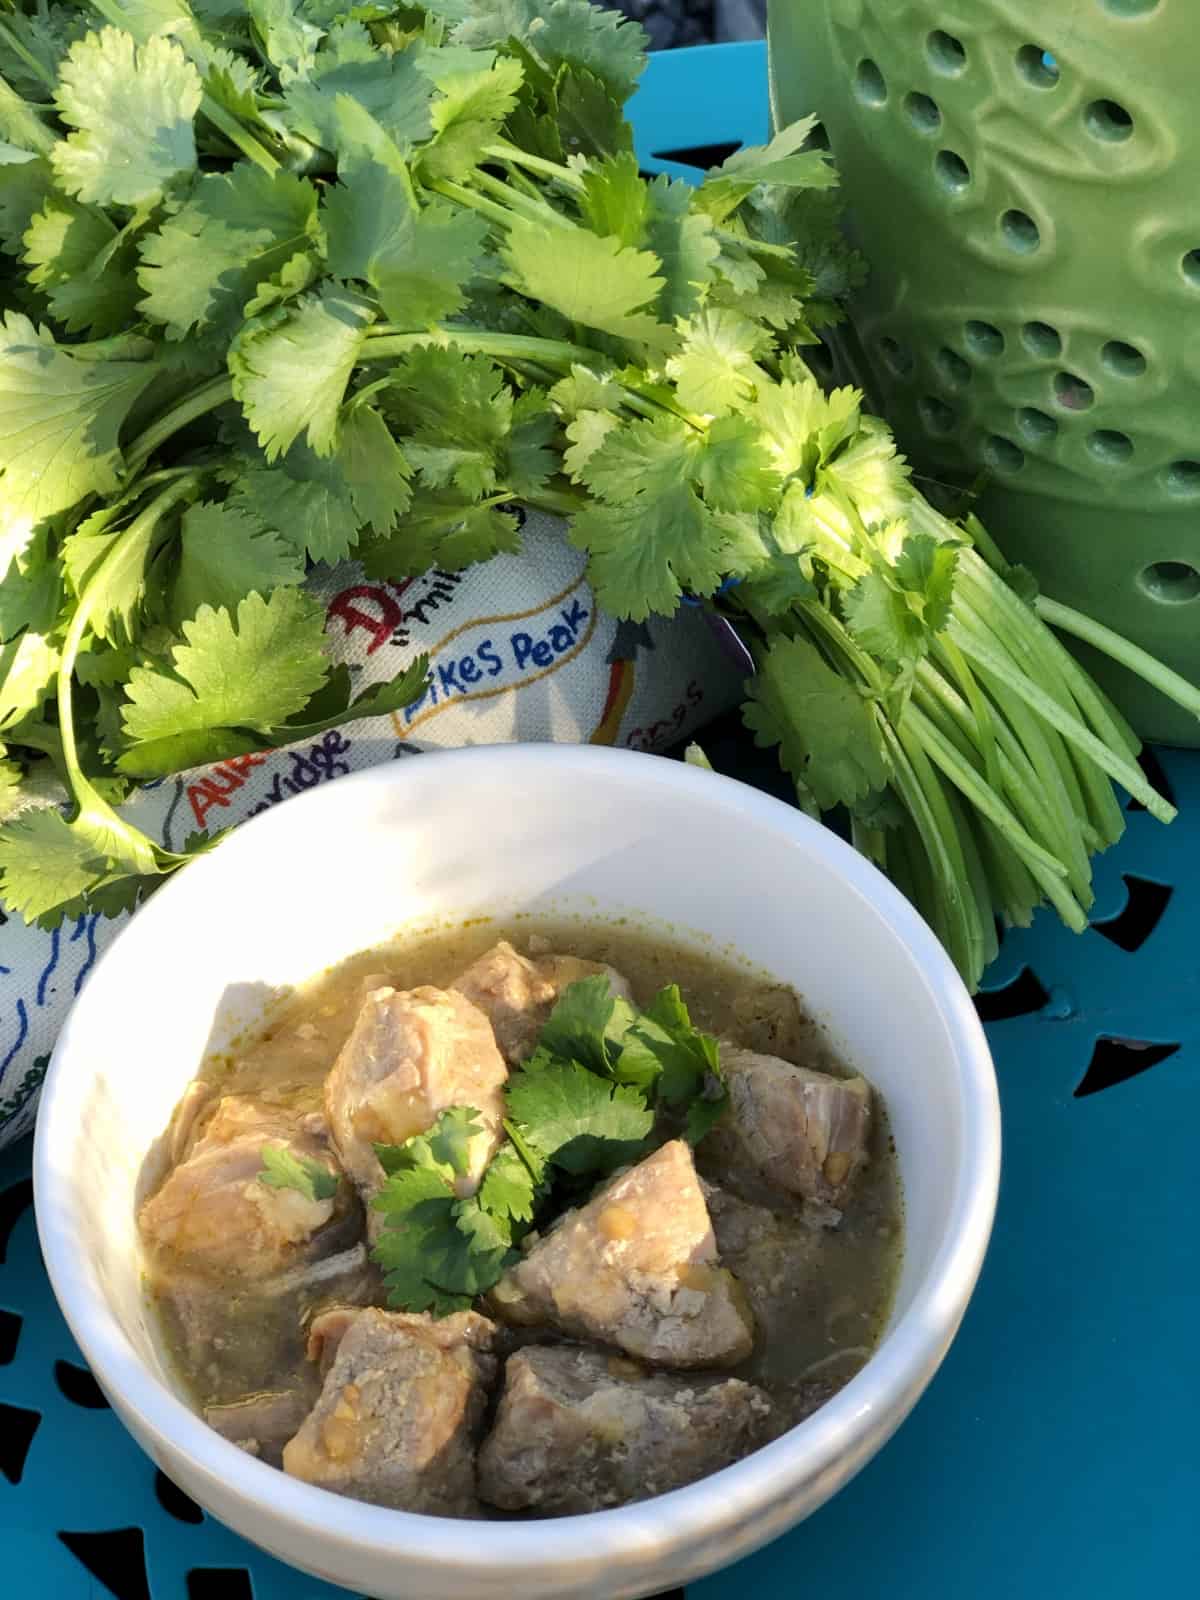 Bowl of pork chili verde on blue table with bunch of fresh cilantro